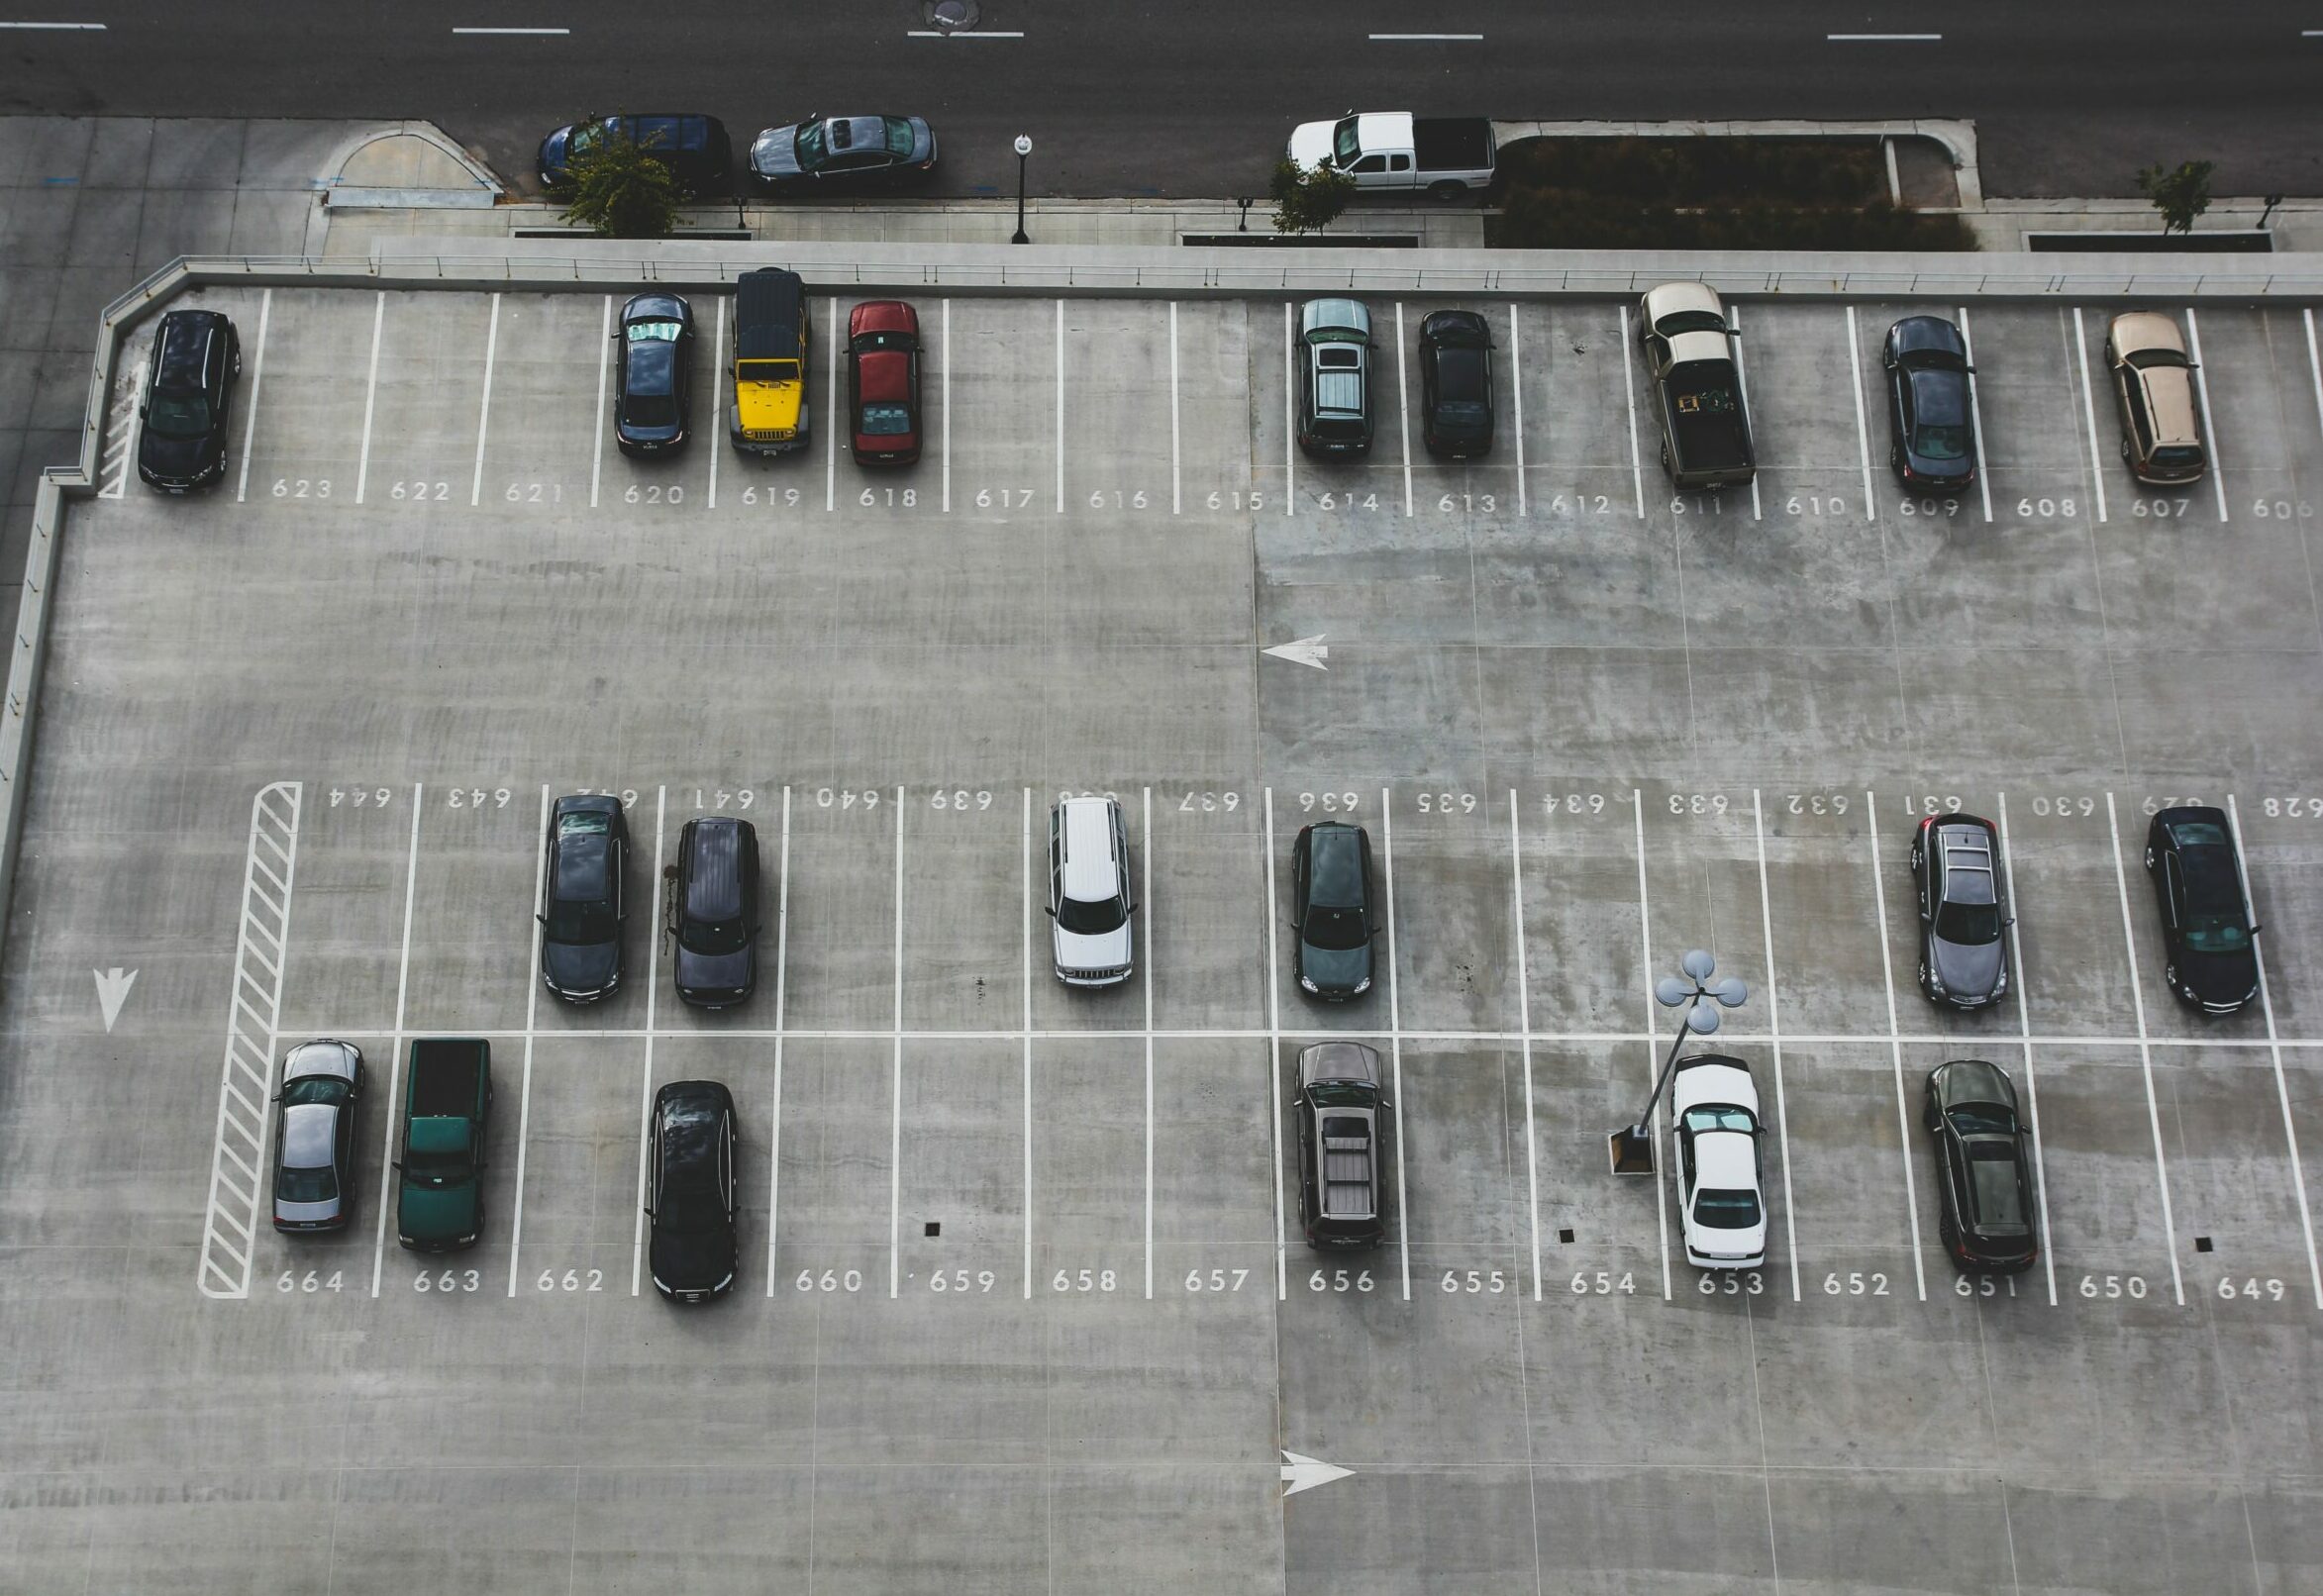 StreetsBlog USA: “How Even Modest Reductions in Parking Can Slash Your Rent”